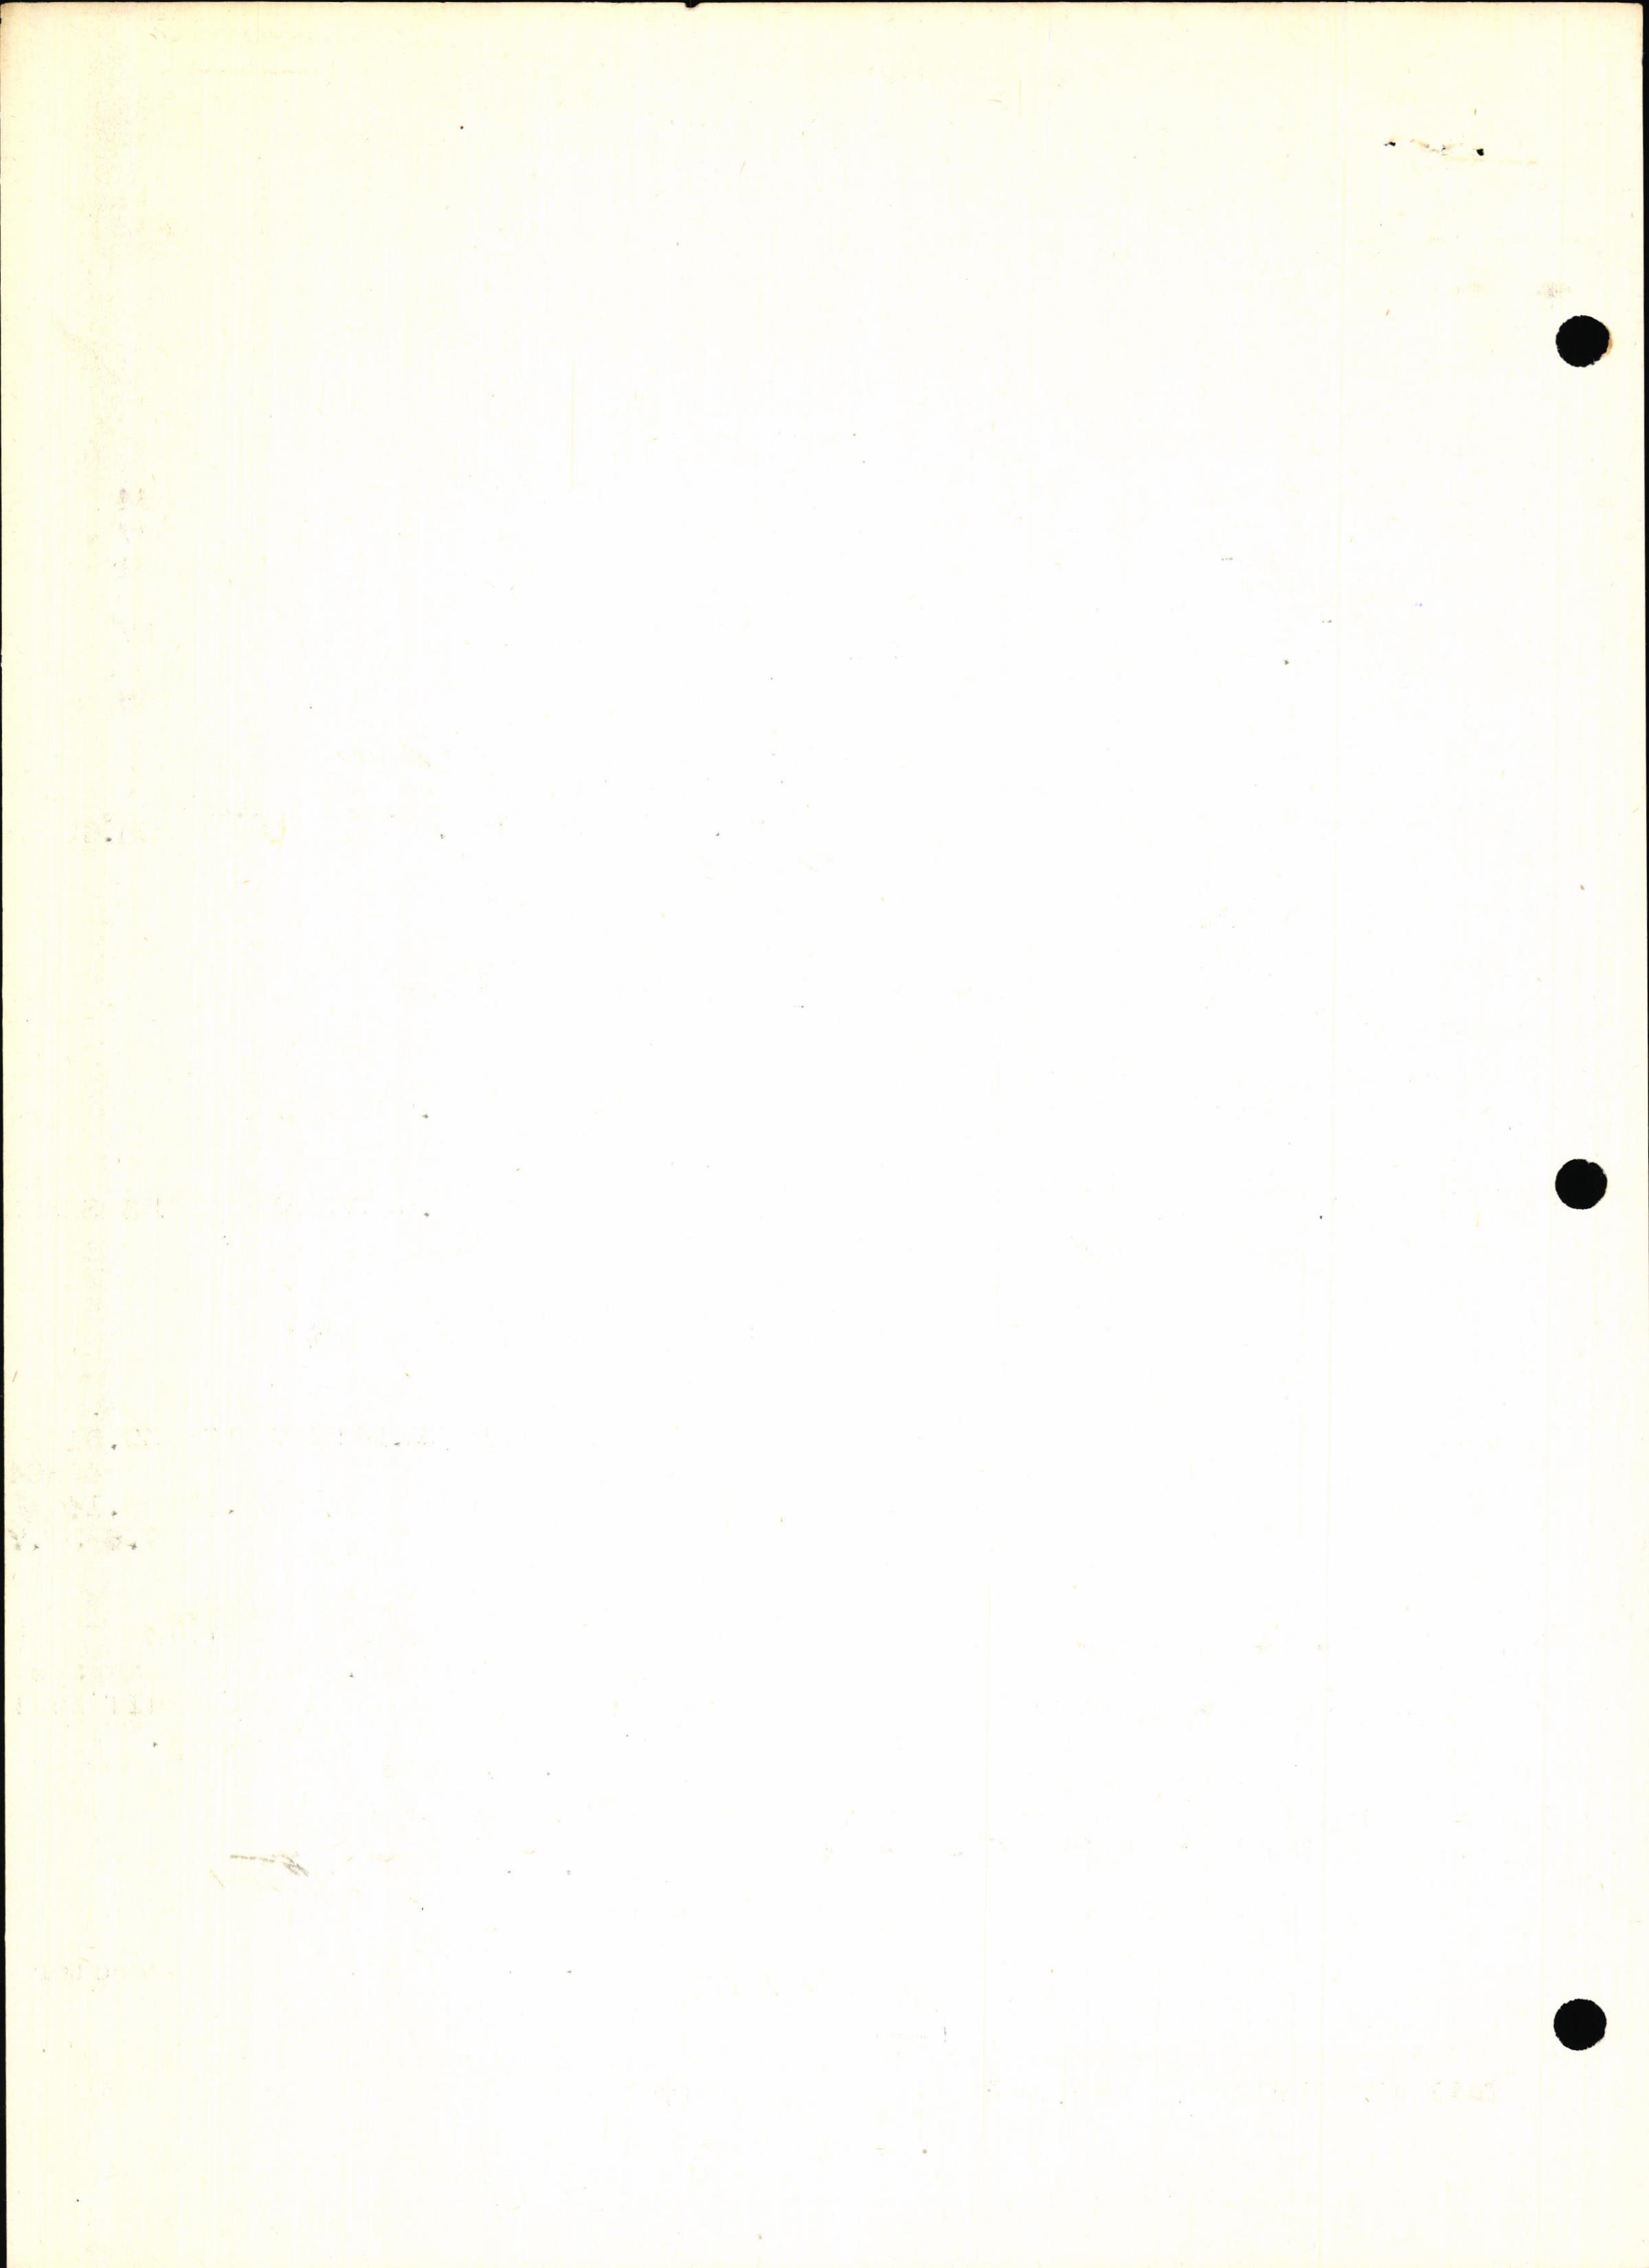 Sample page 6 from AirCorps Library document: Technical Information for Serial Number 1478